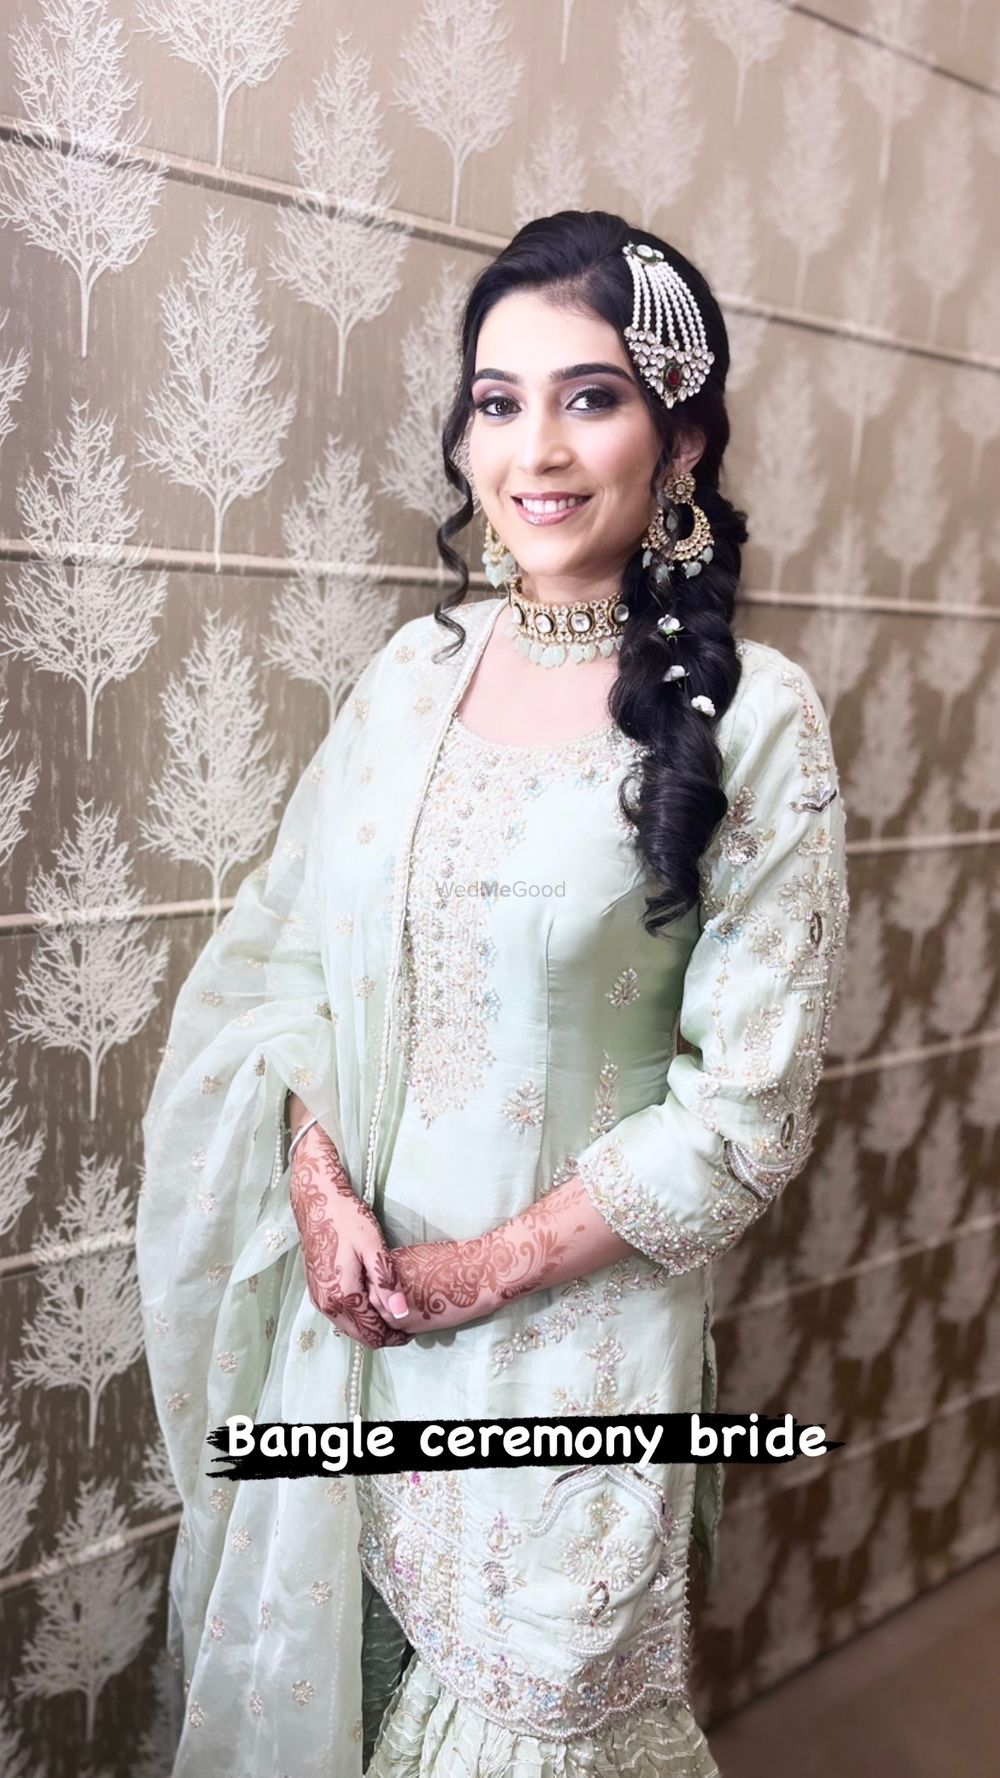 Photo From Brides - By Make-Up by Bhawna Arora